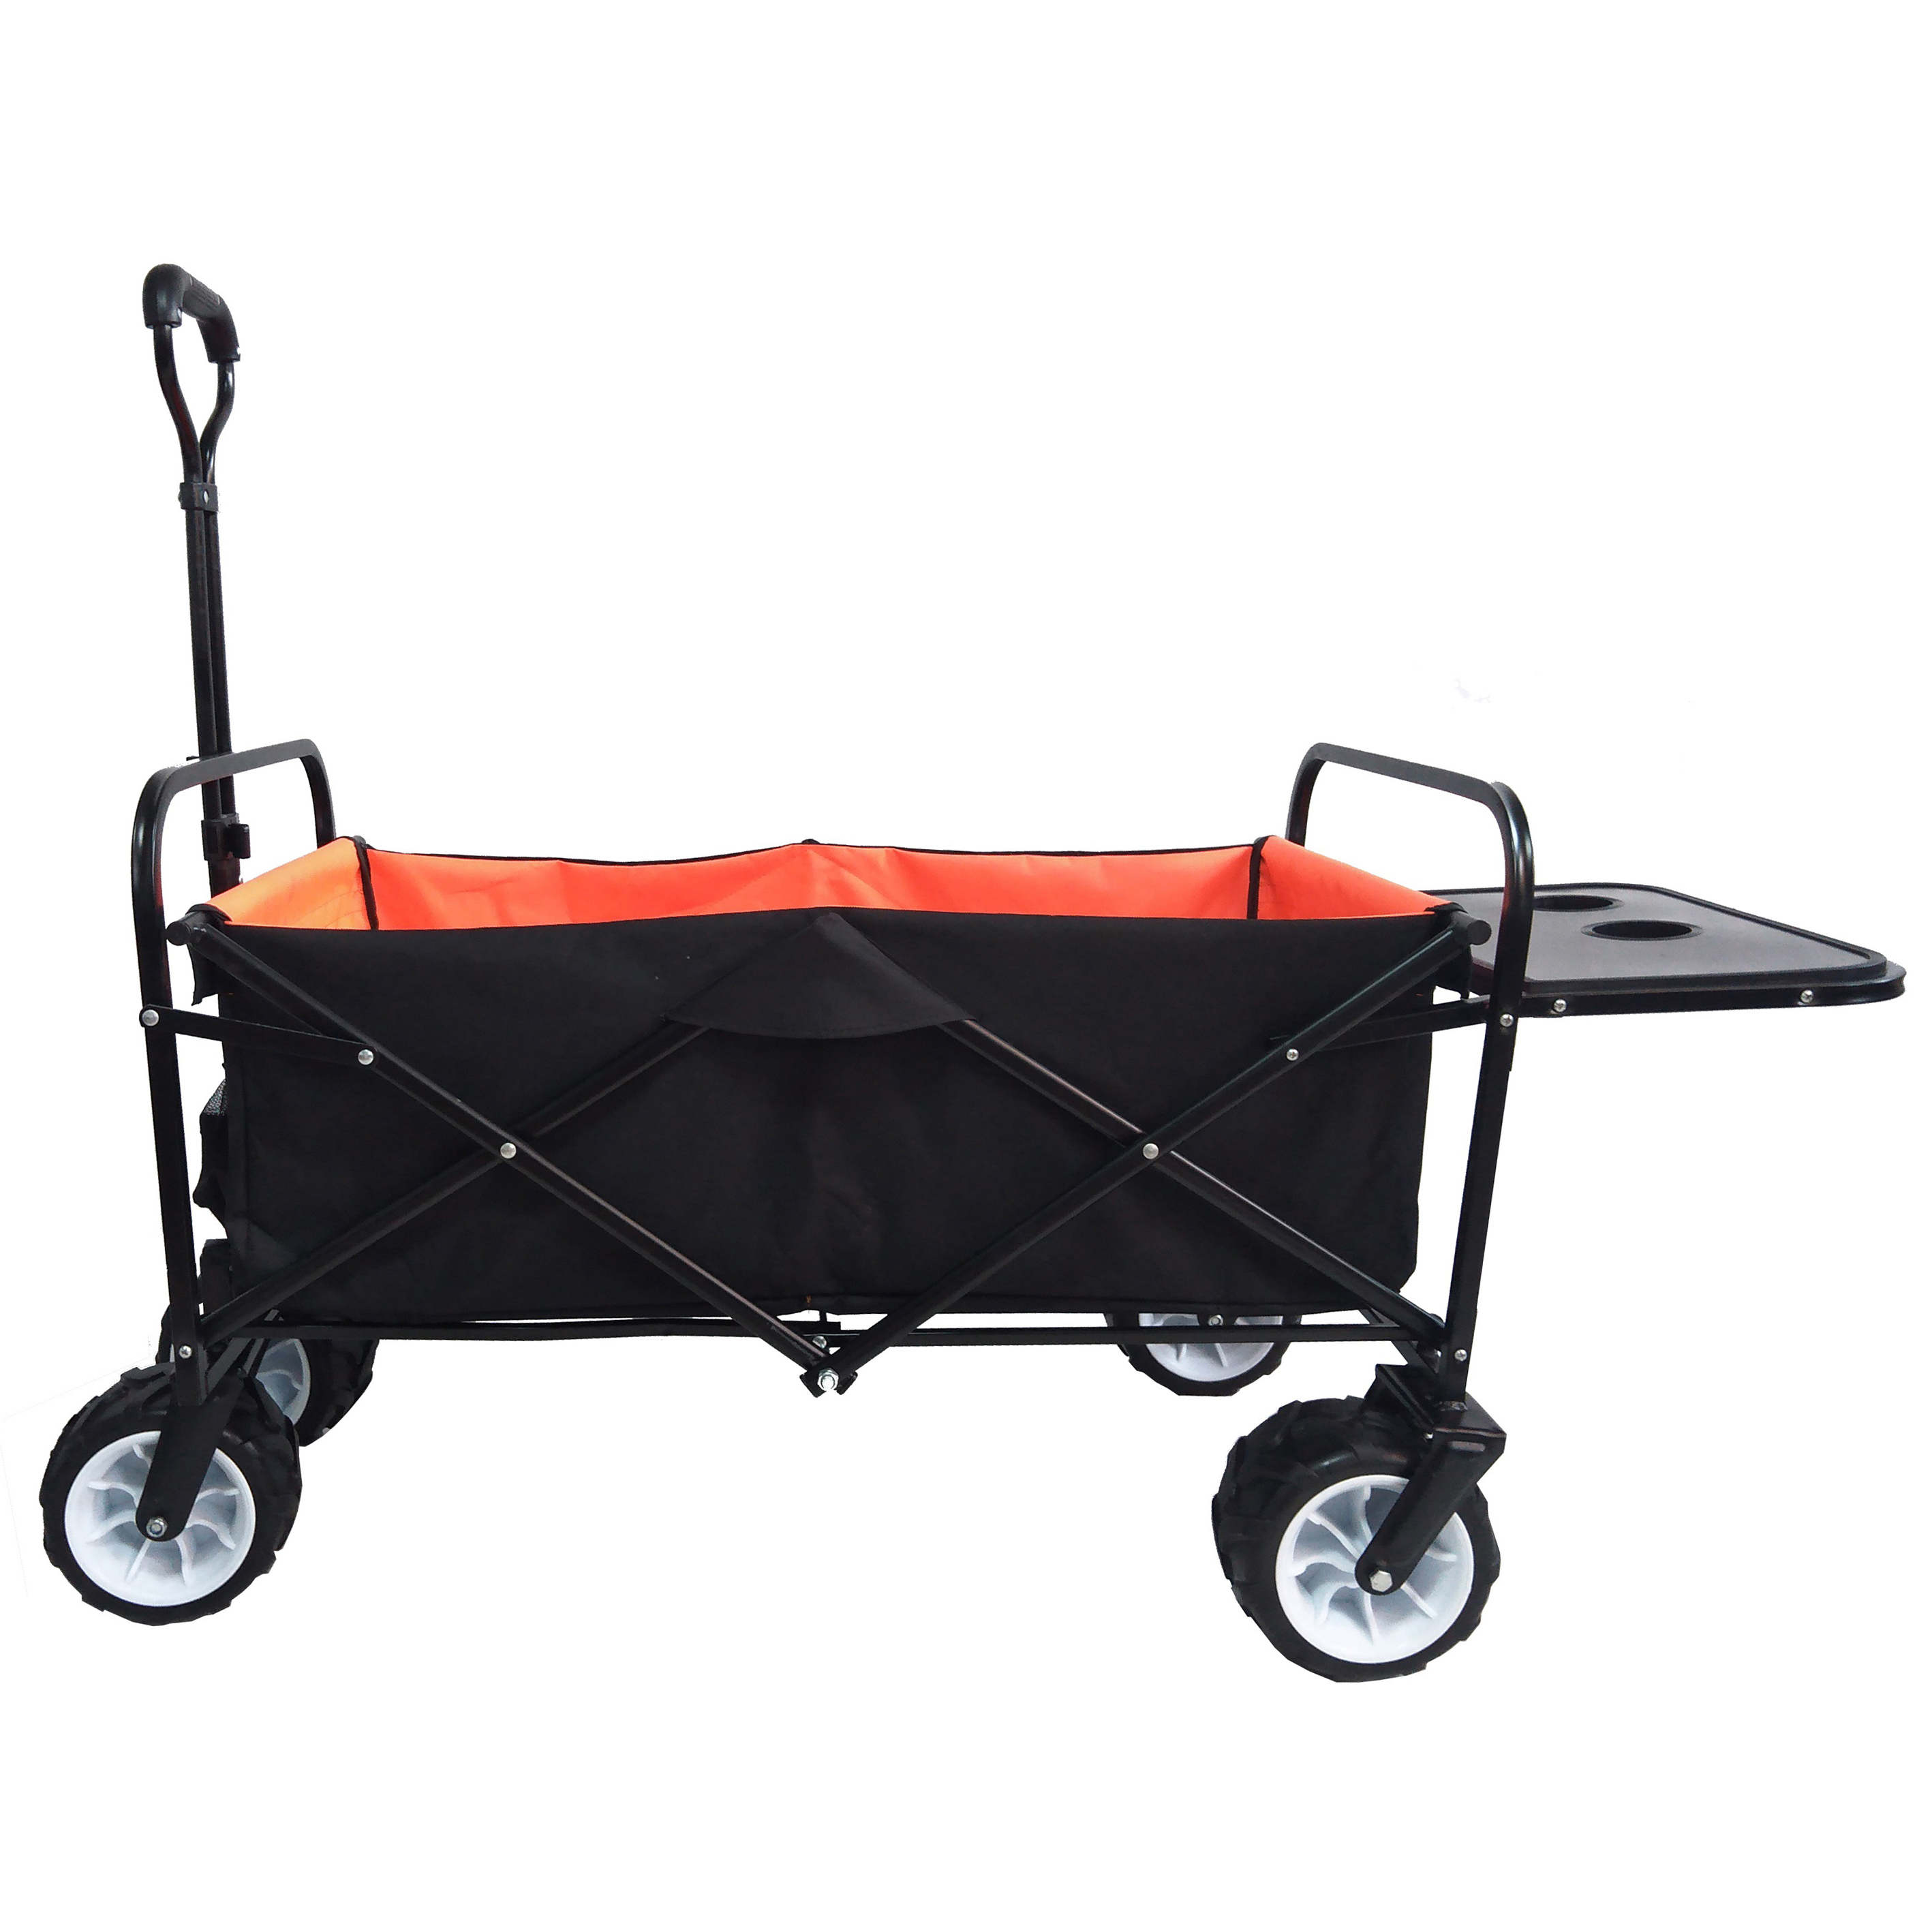 folding wagon Collapsible Outdoor Utility Wagon, Heavy Duty Folding Garden Portable Hand Cart, Drink Holder, Adjustable Handles and Double Fabric, for Beach, Garden, Sports (Yellow)-Boyel Living